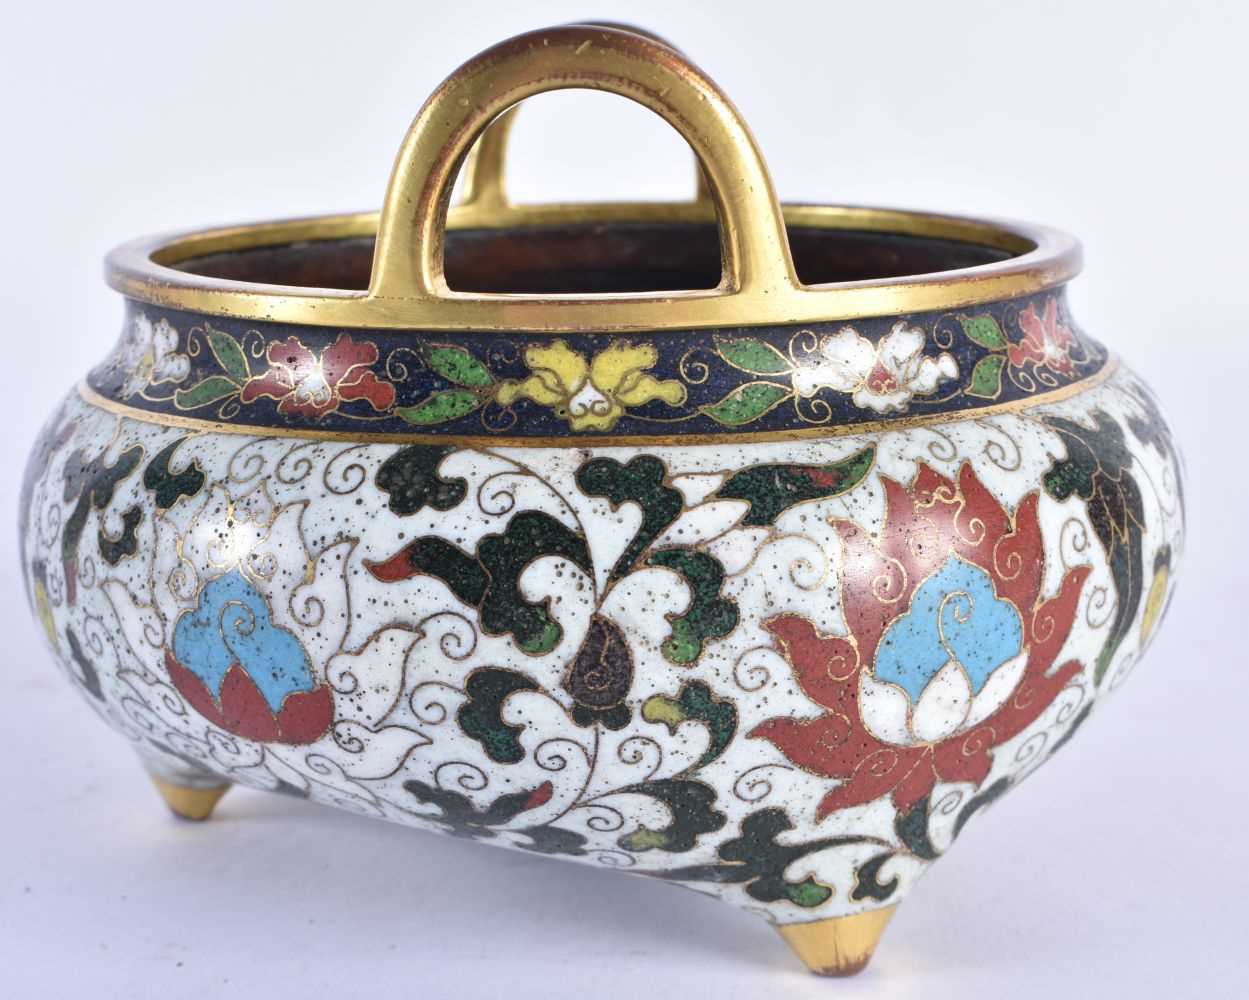 A FINE CHINESE TWIN HANDLED CLOISONNE ENAMEL CENSER probably 16th/17th century, decorated with - Image 2 of 5